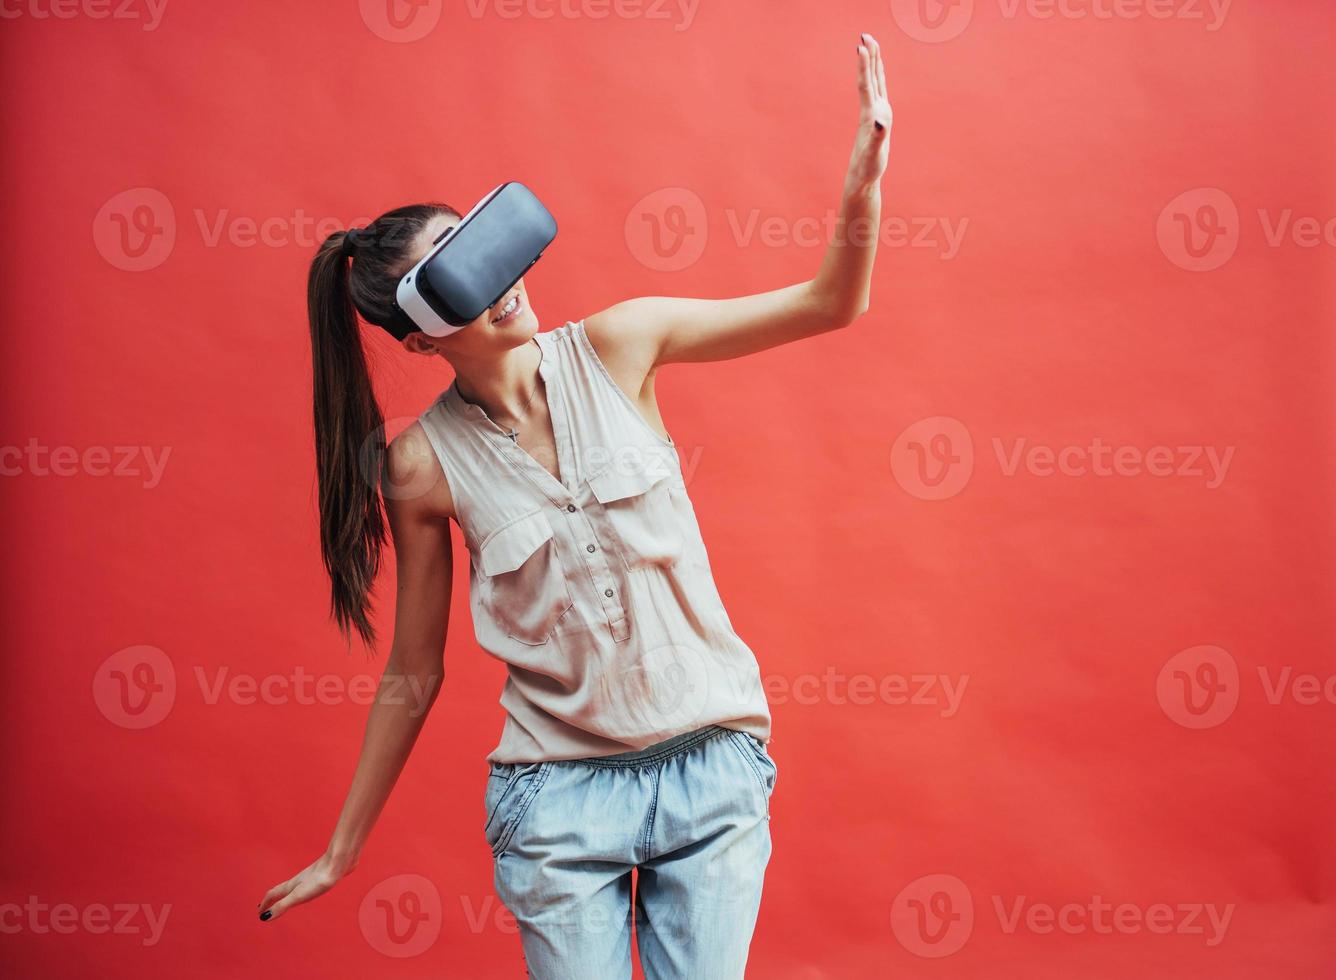 A young woman with a VR device on a red background in studio photo